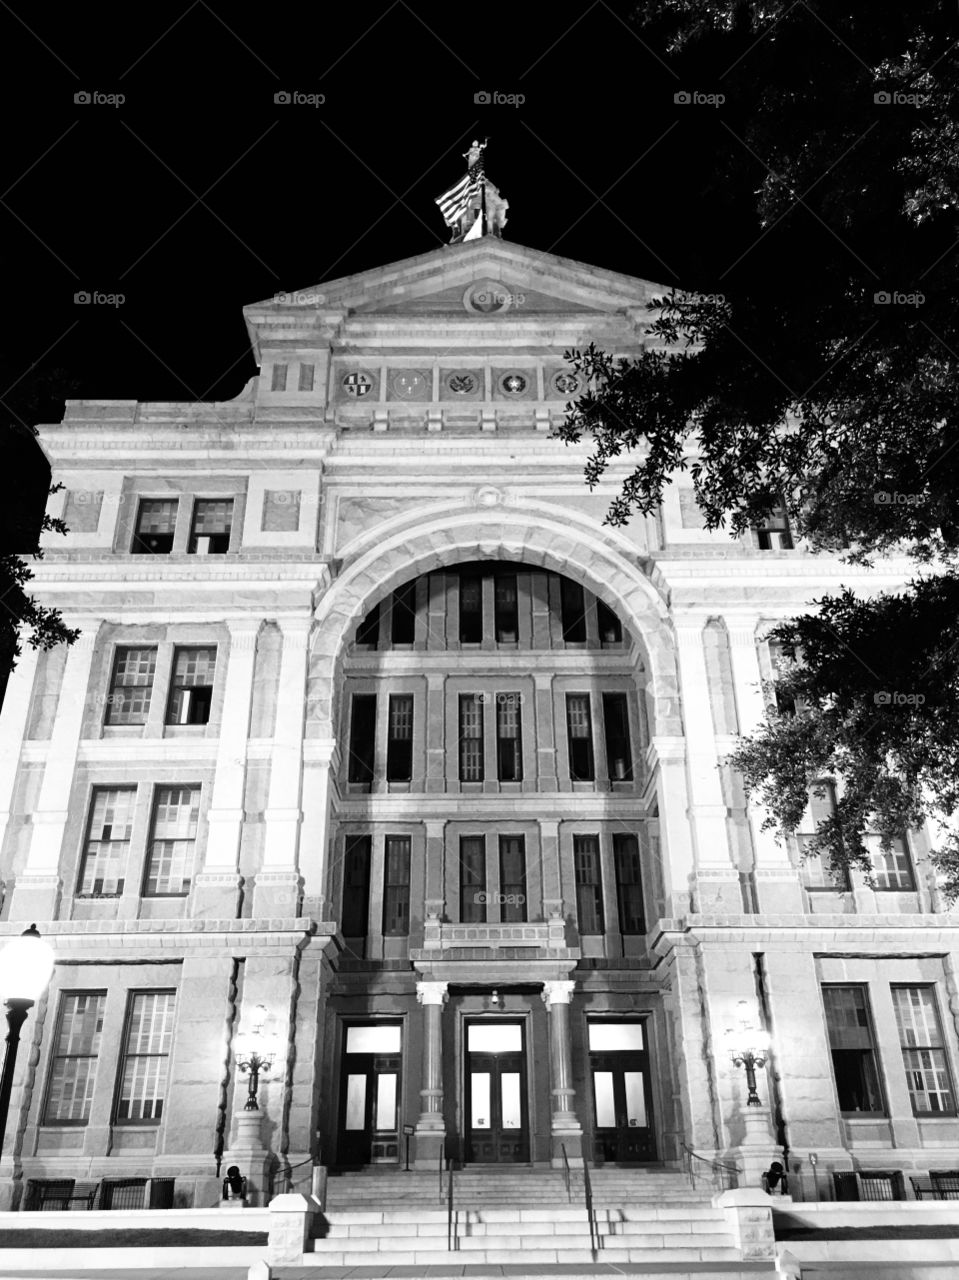 Black and white night photo of the Texas State Capitol in Austin, Texas.